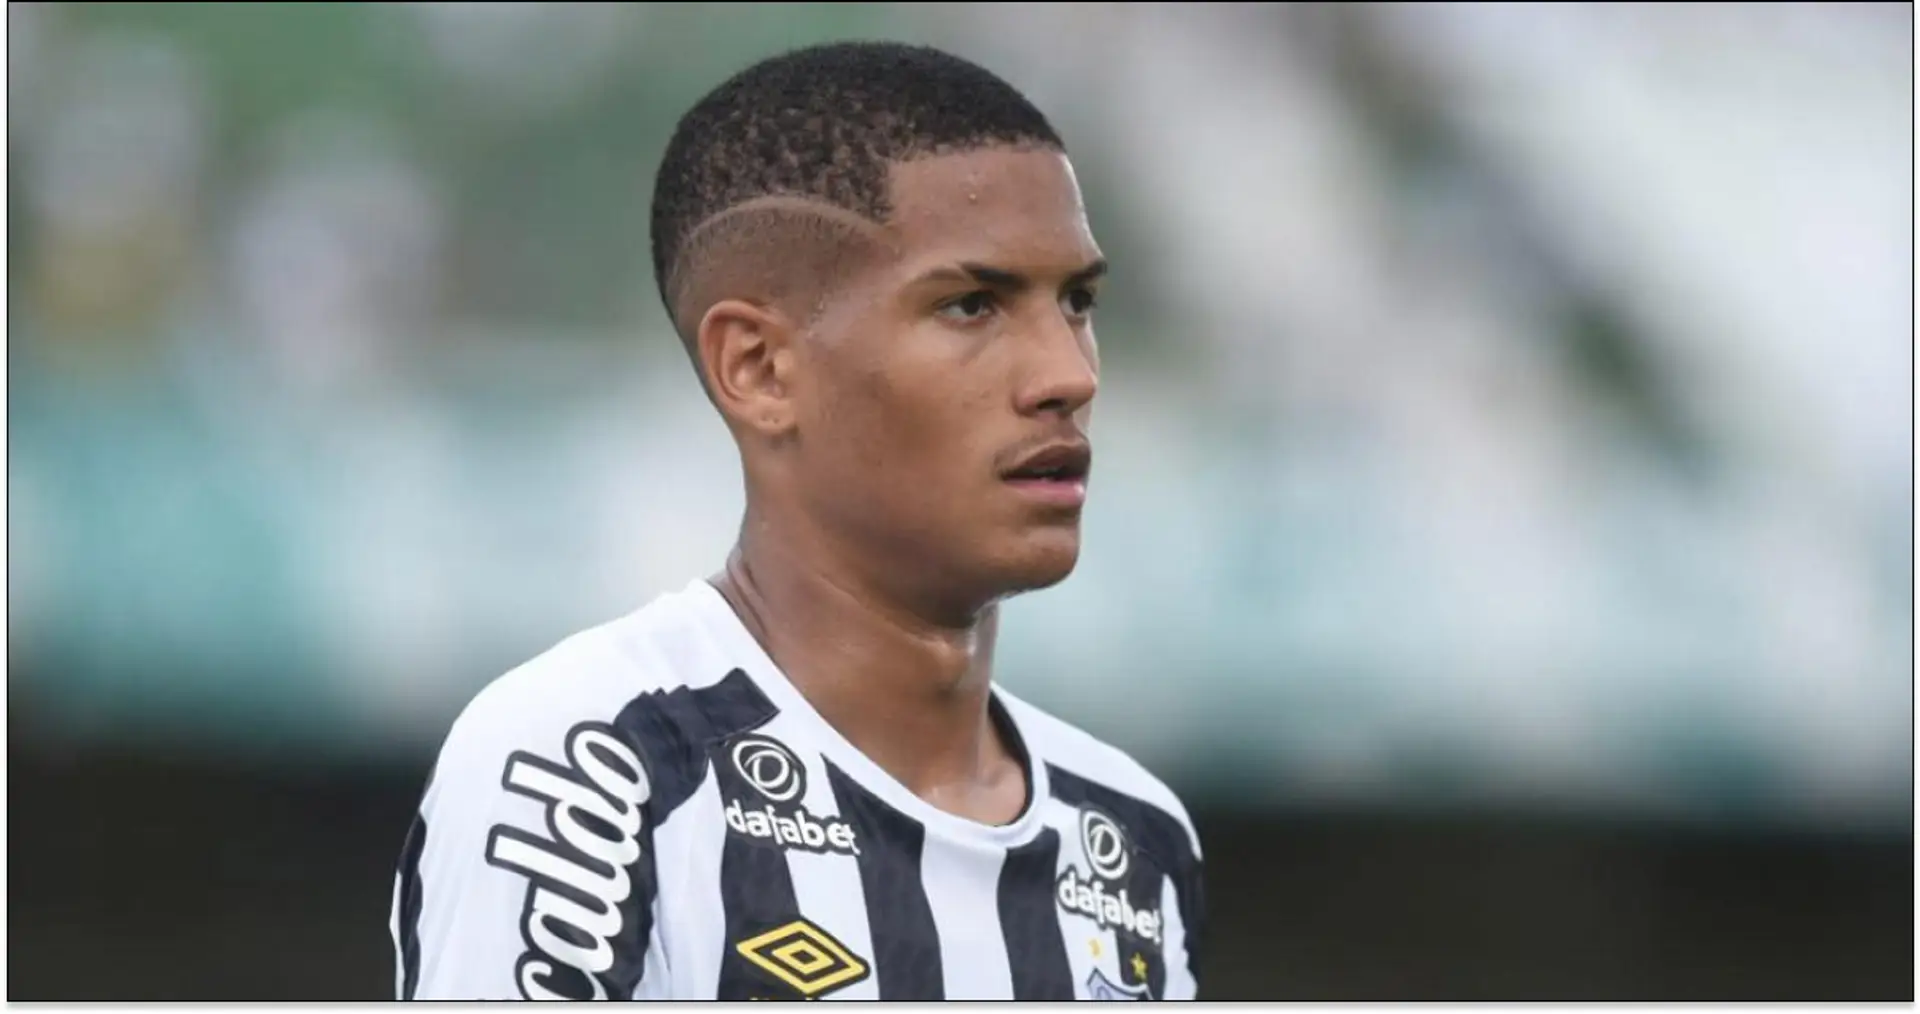 'With a heavy heart': Father all but confirms Angelo Gabriel's move to Chelsea